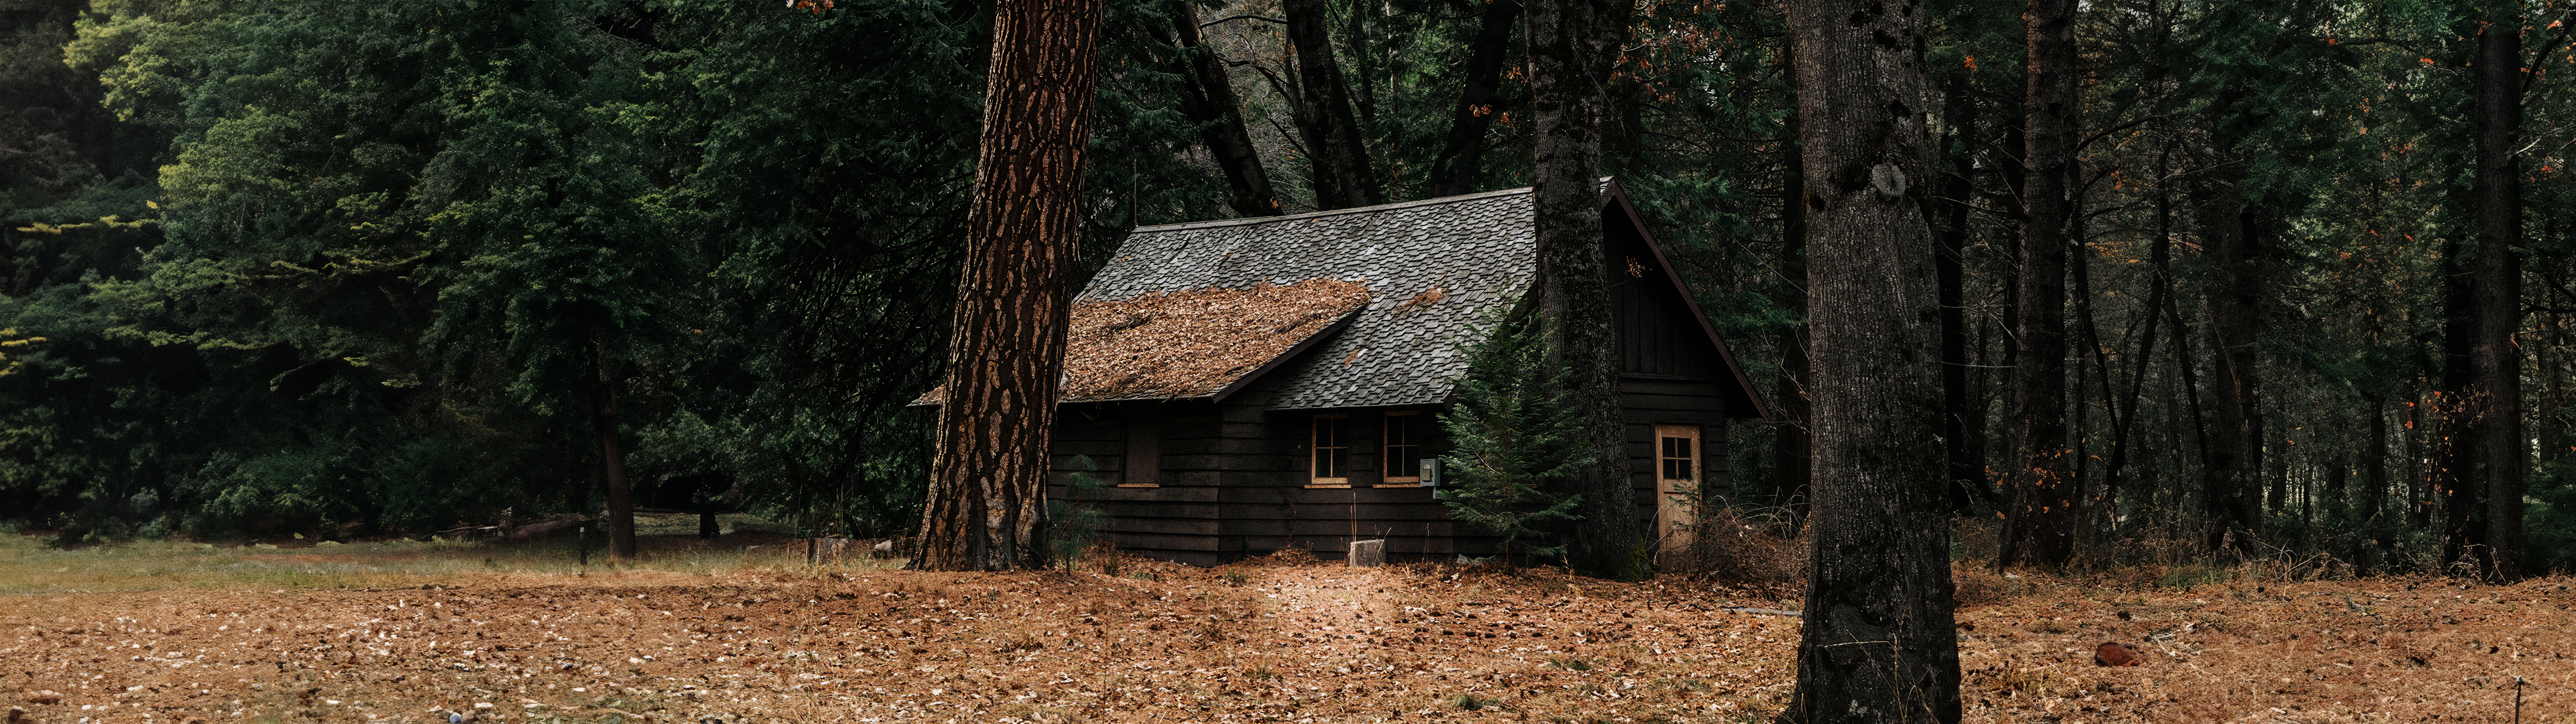 General 5120x1440 forest cabin ultrawide outdoors